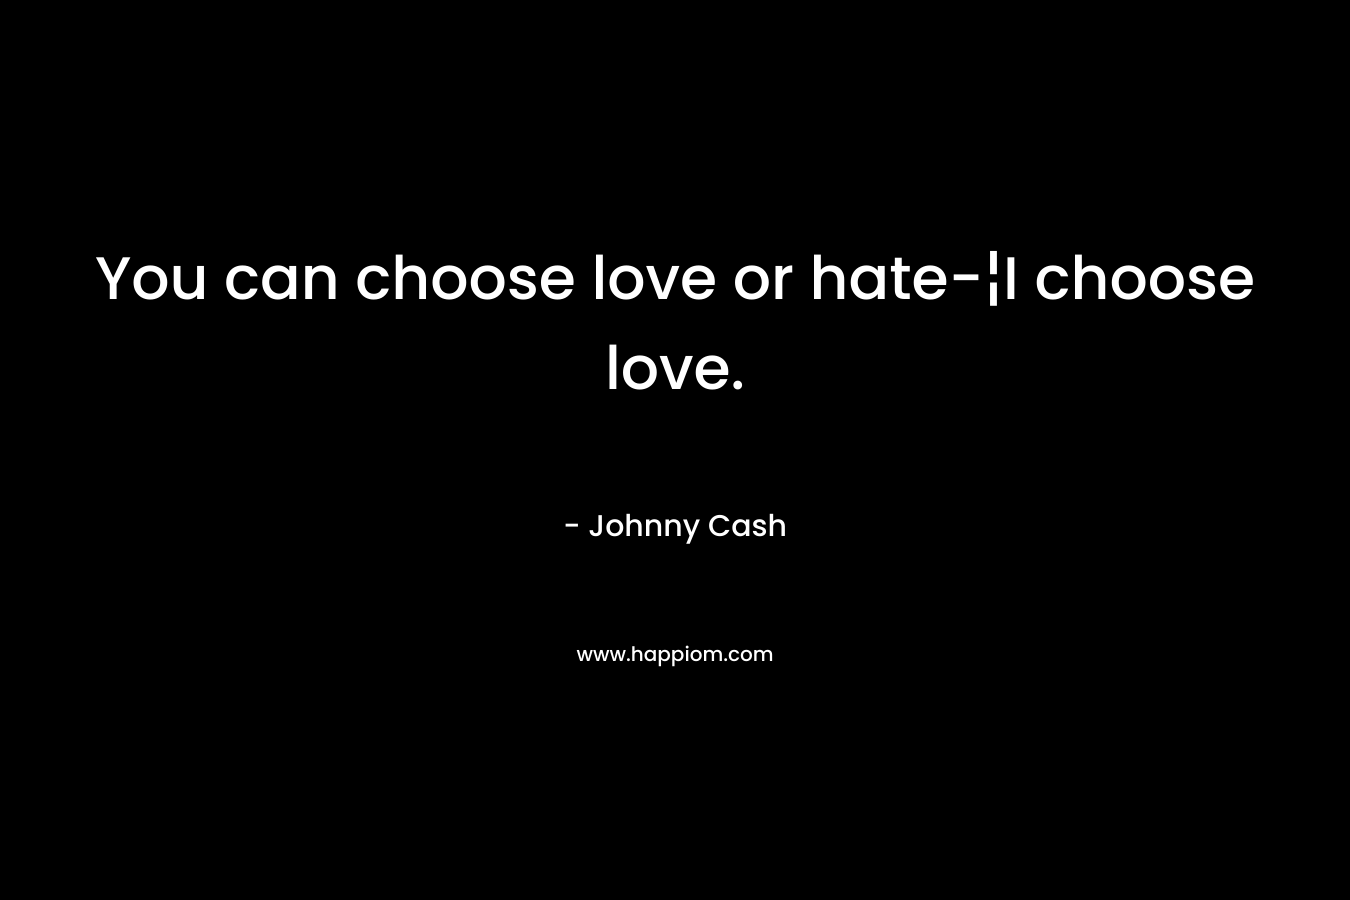 You can choose love or hate-¦I choose love.